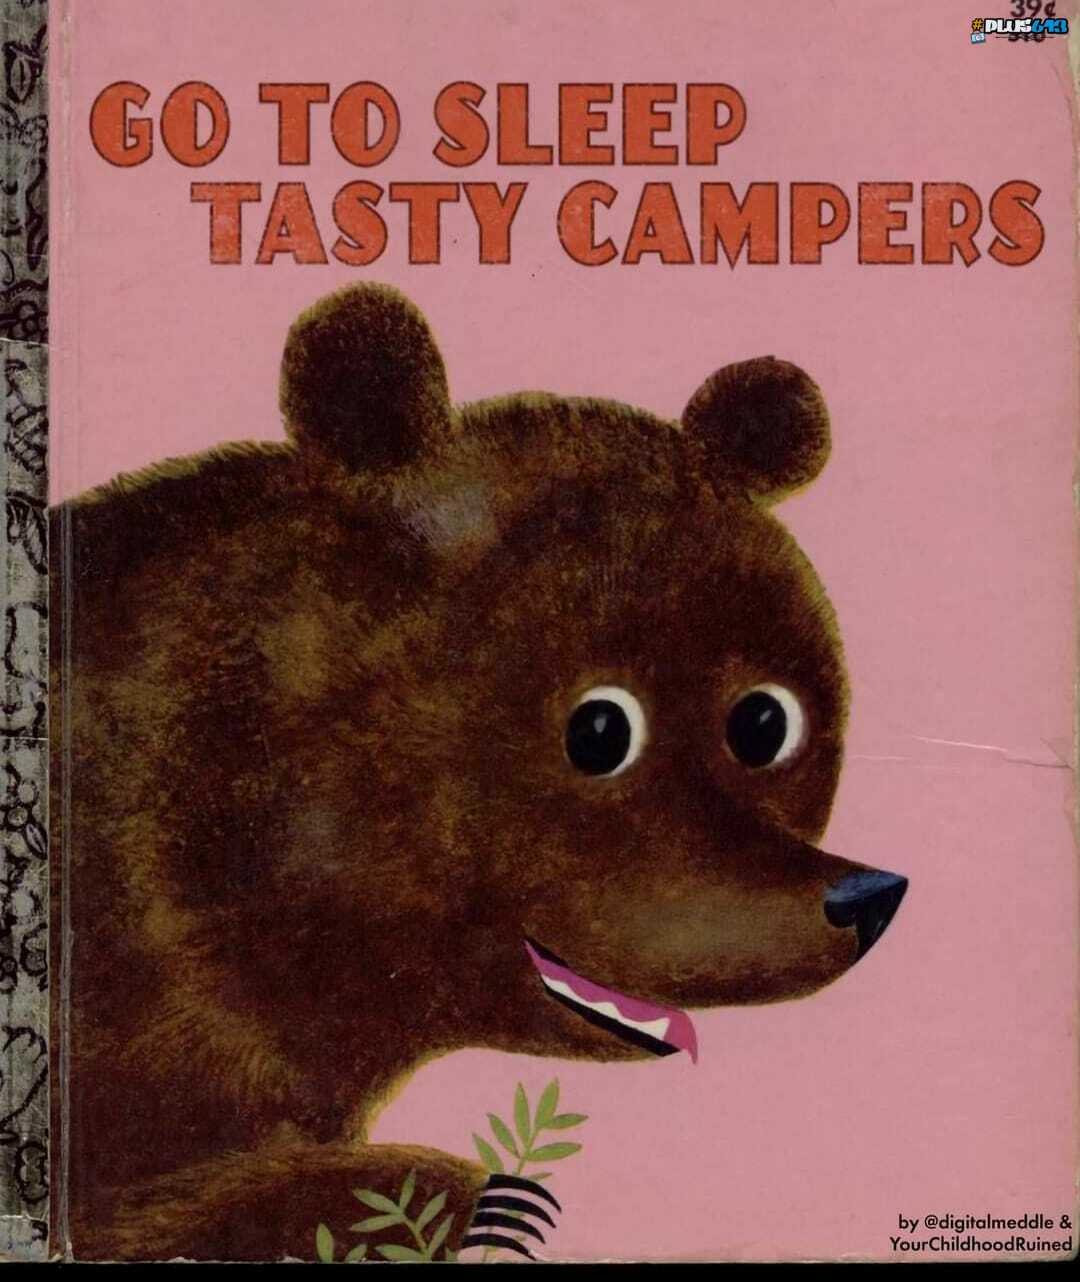 A bedtime story